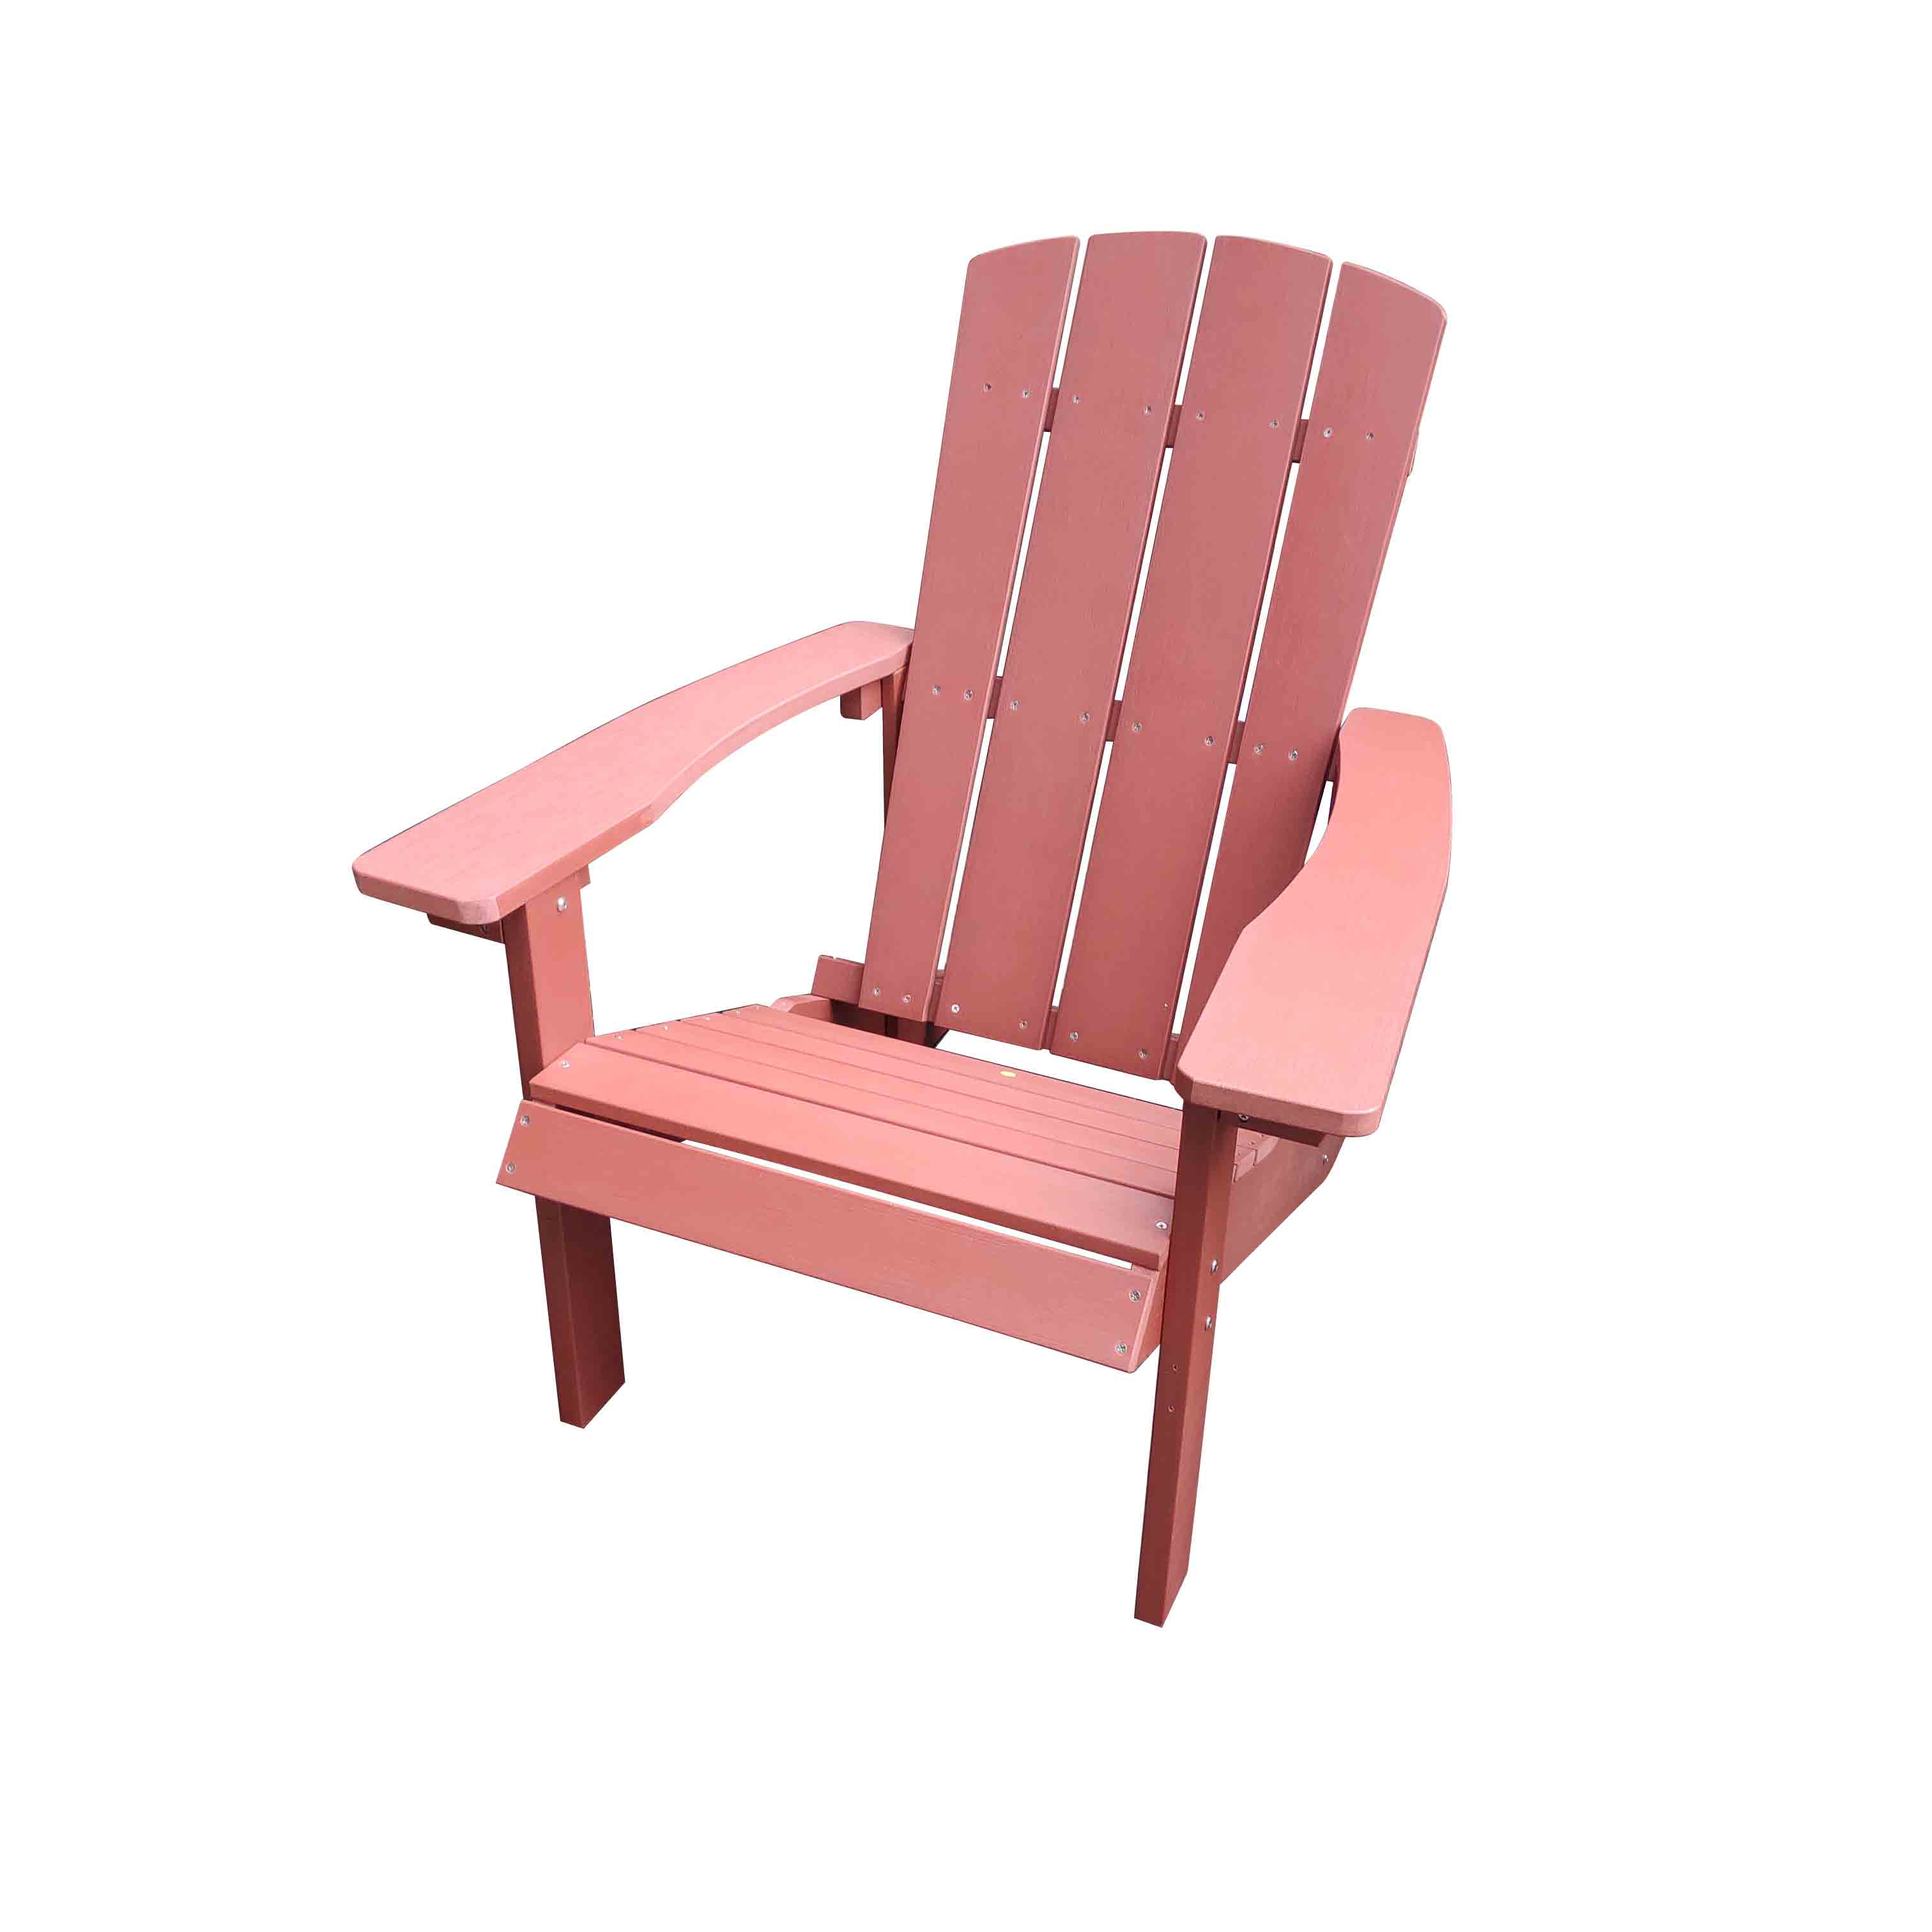 JJ-C14501-RED-GG PS wood Adirondack chair Featured Image